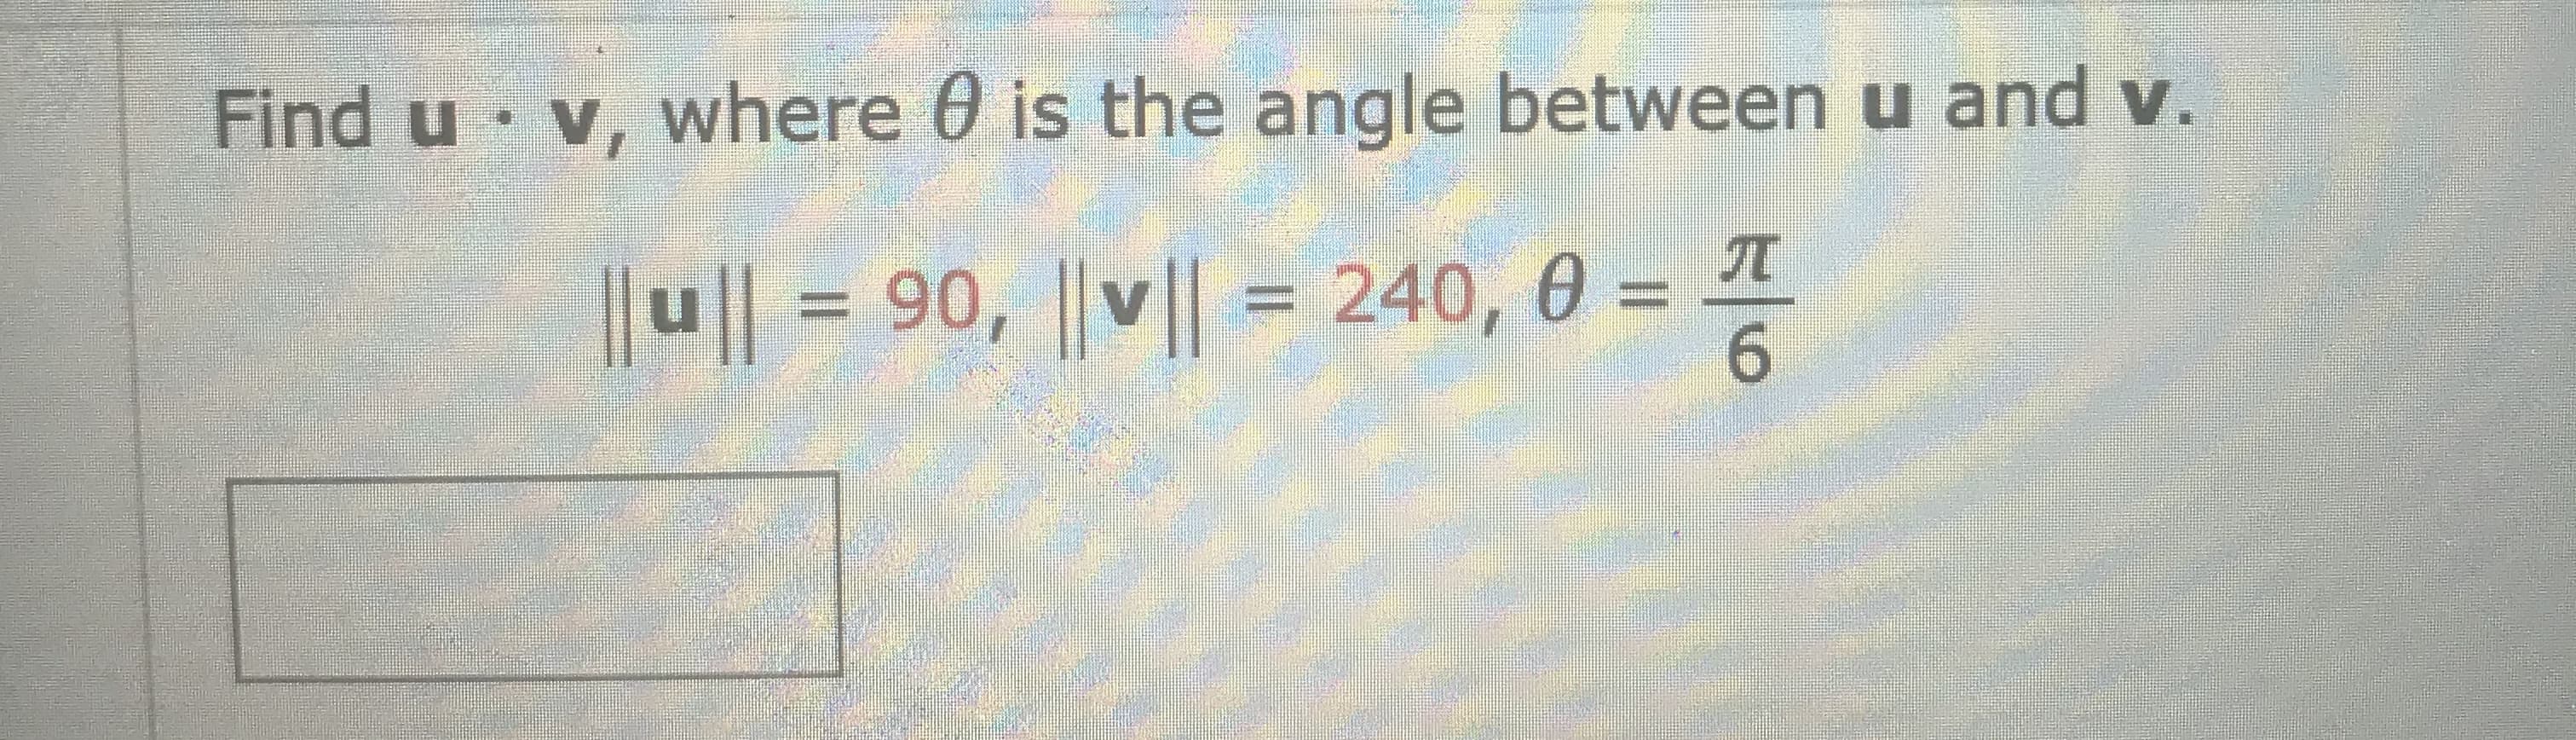 Find u v, where 0 is the angle between u and v.
|l1=90, ||v| = 240, θ =D
90, ||v|| = 240, 0 :
= T
6.
